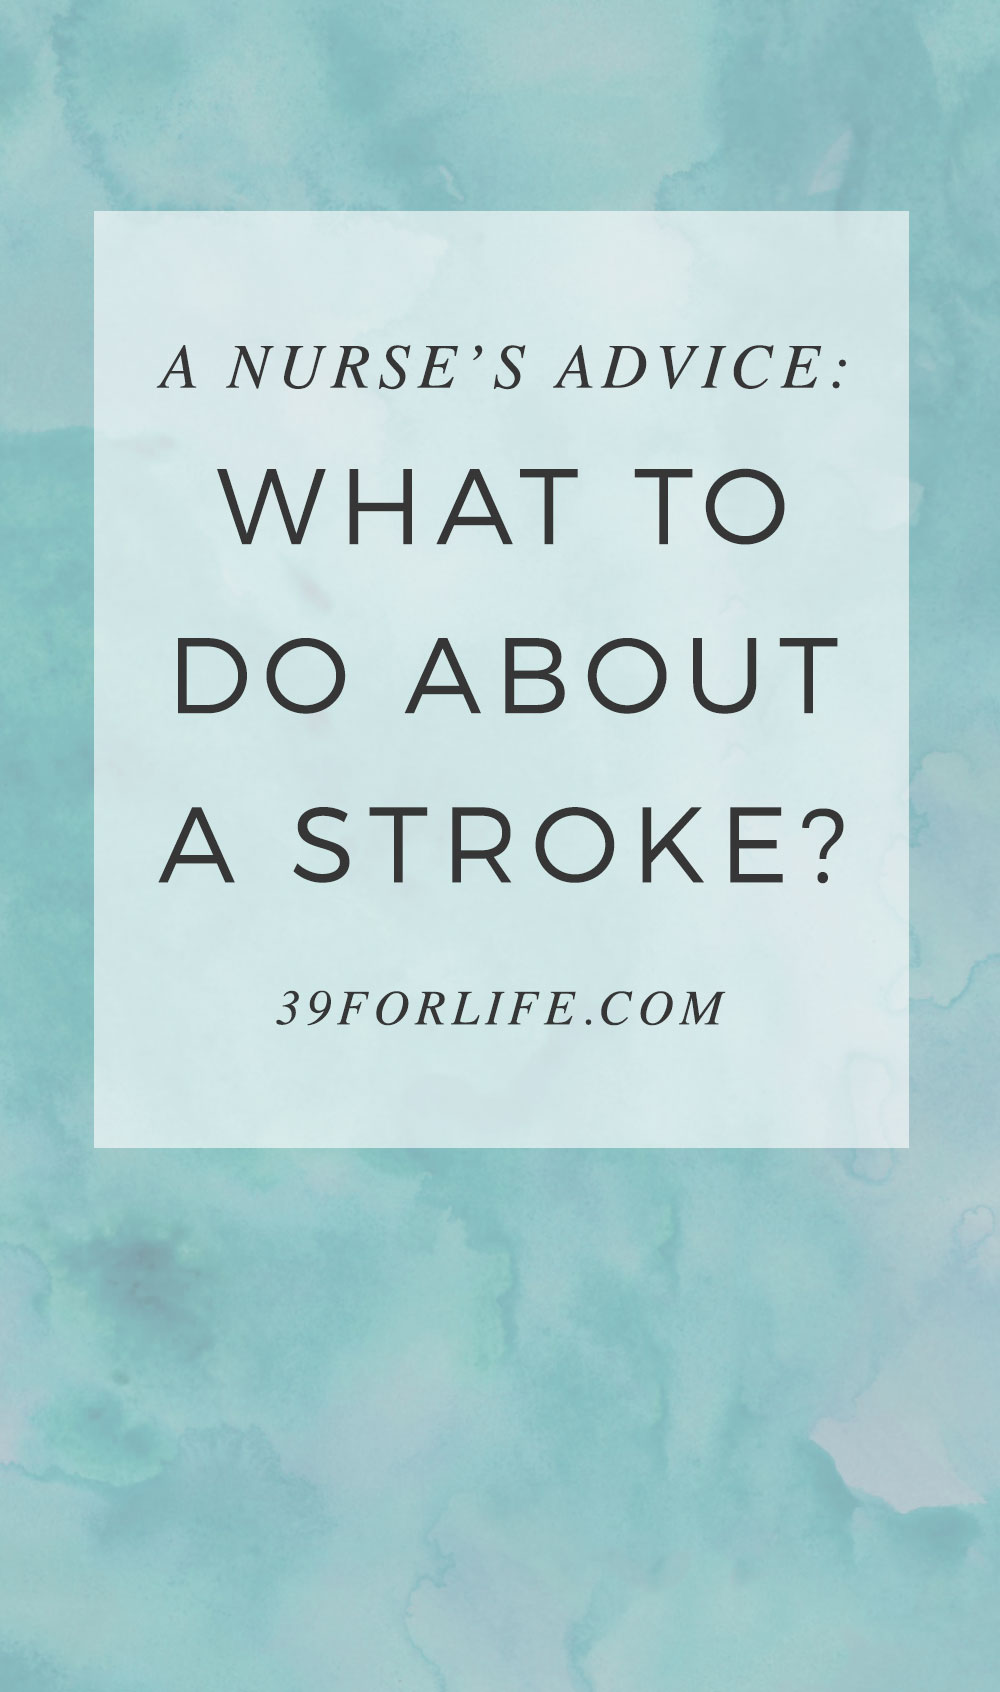 Strokes can be terrifying for seniors and family members. Here is the expert advice of a registered nurse on what to do about them and how to prevent!